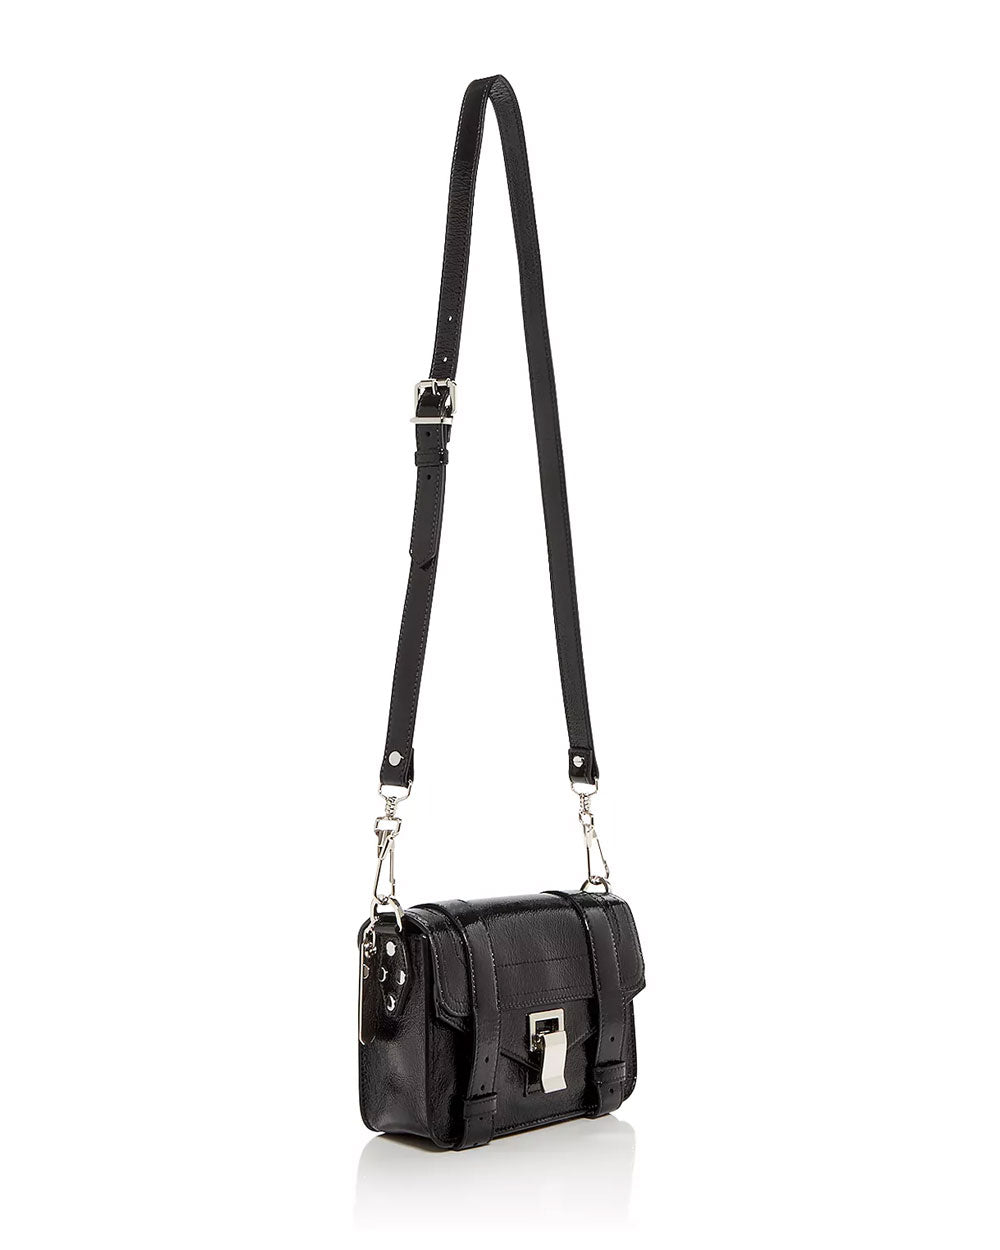 PS 1 Tiny Leather Crossbody Bag in White - Proenza Schouler